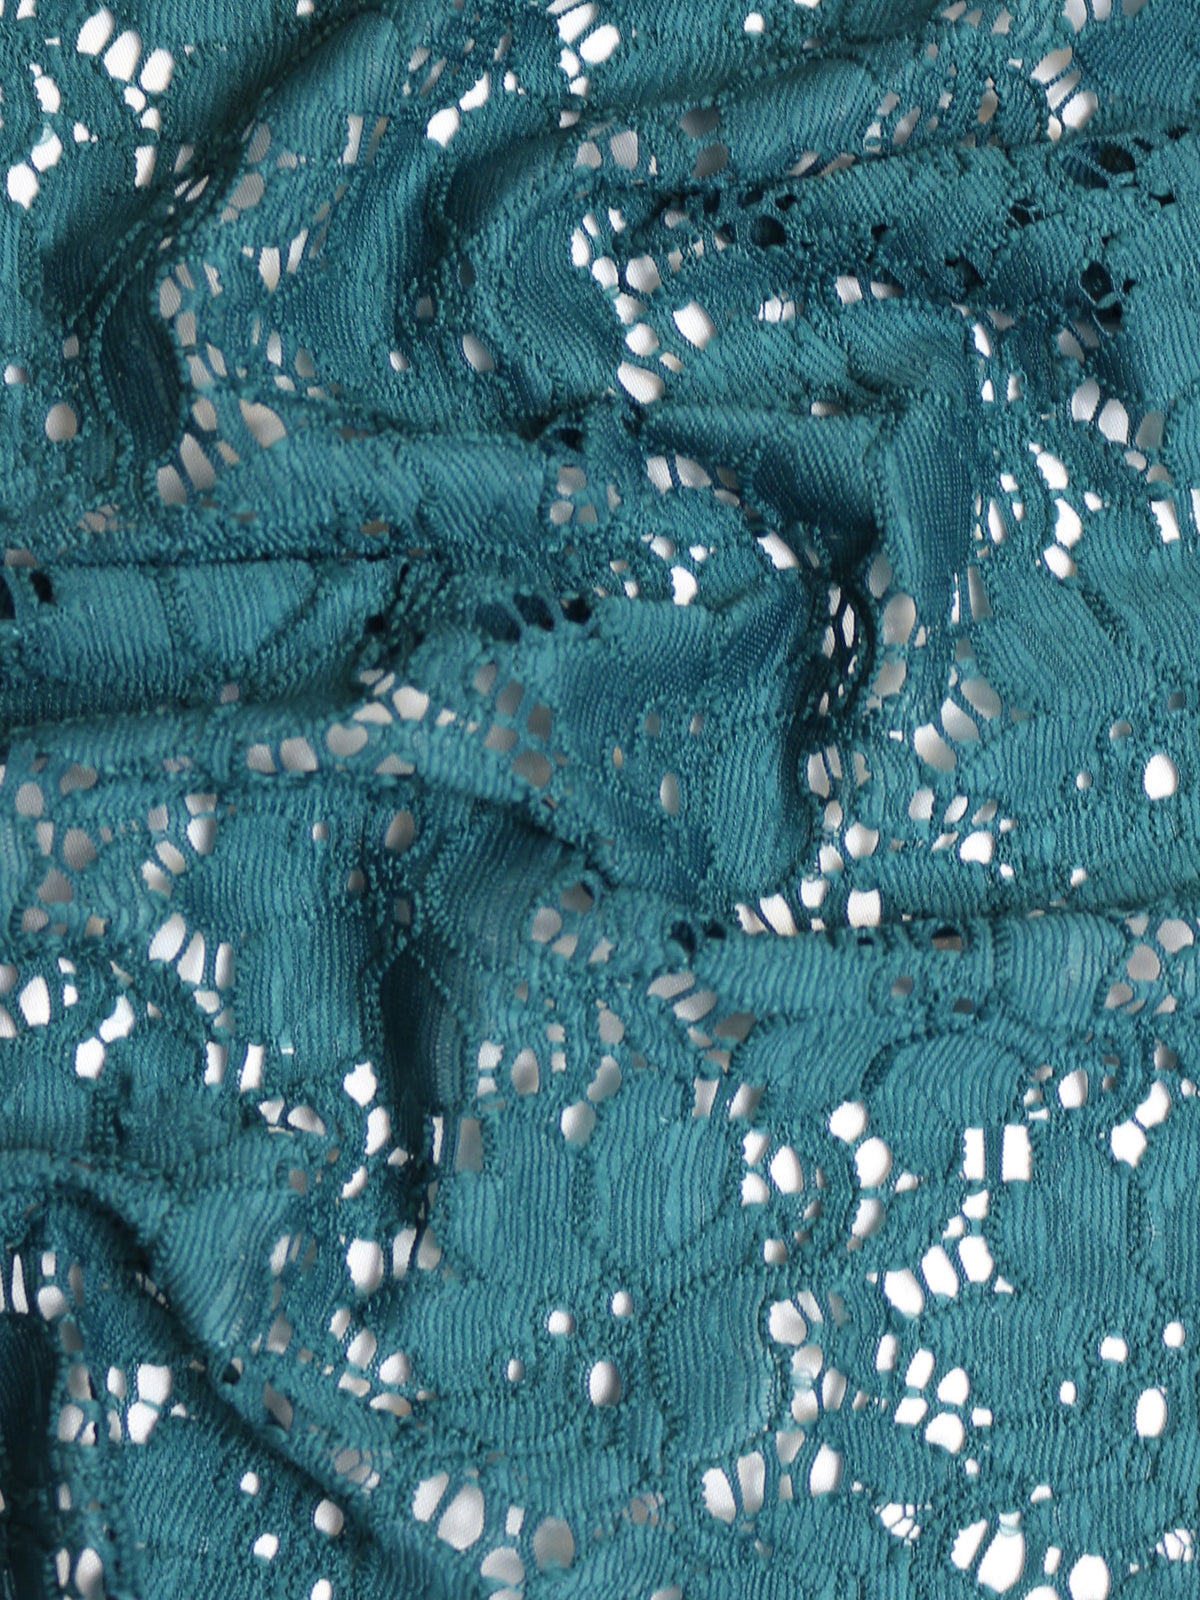 Teal Lace - Esther